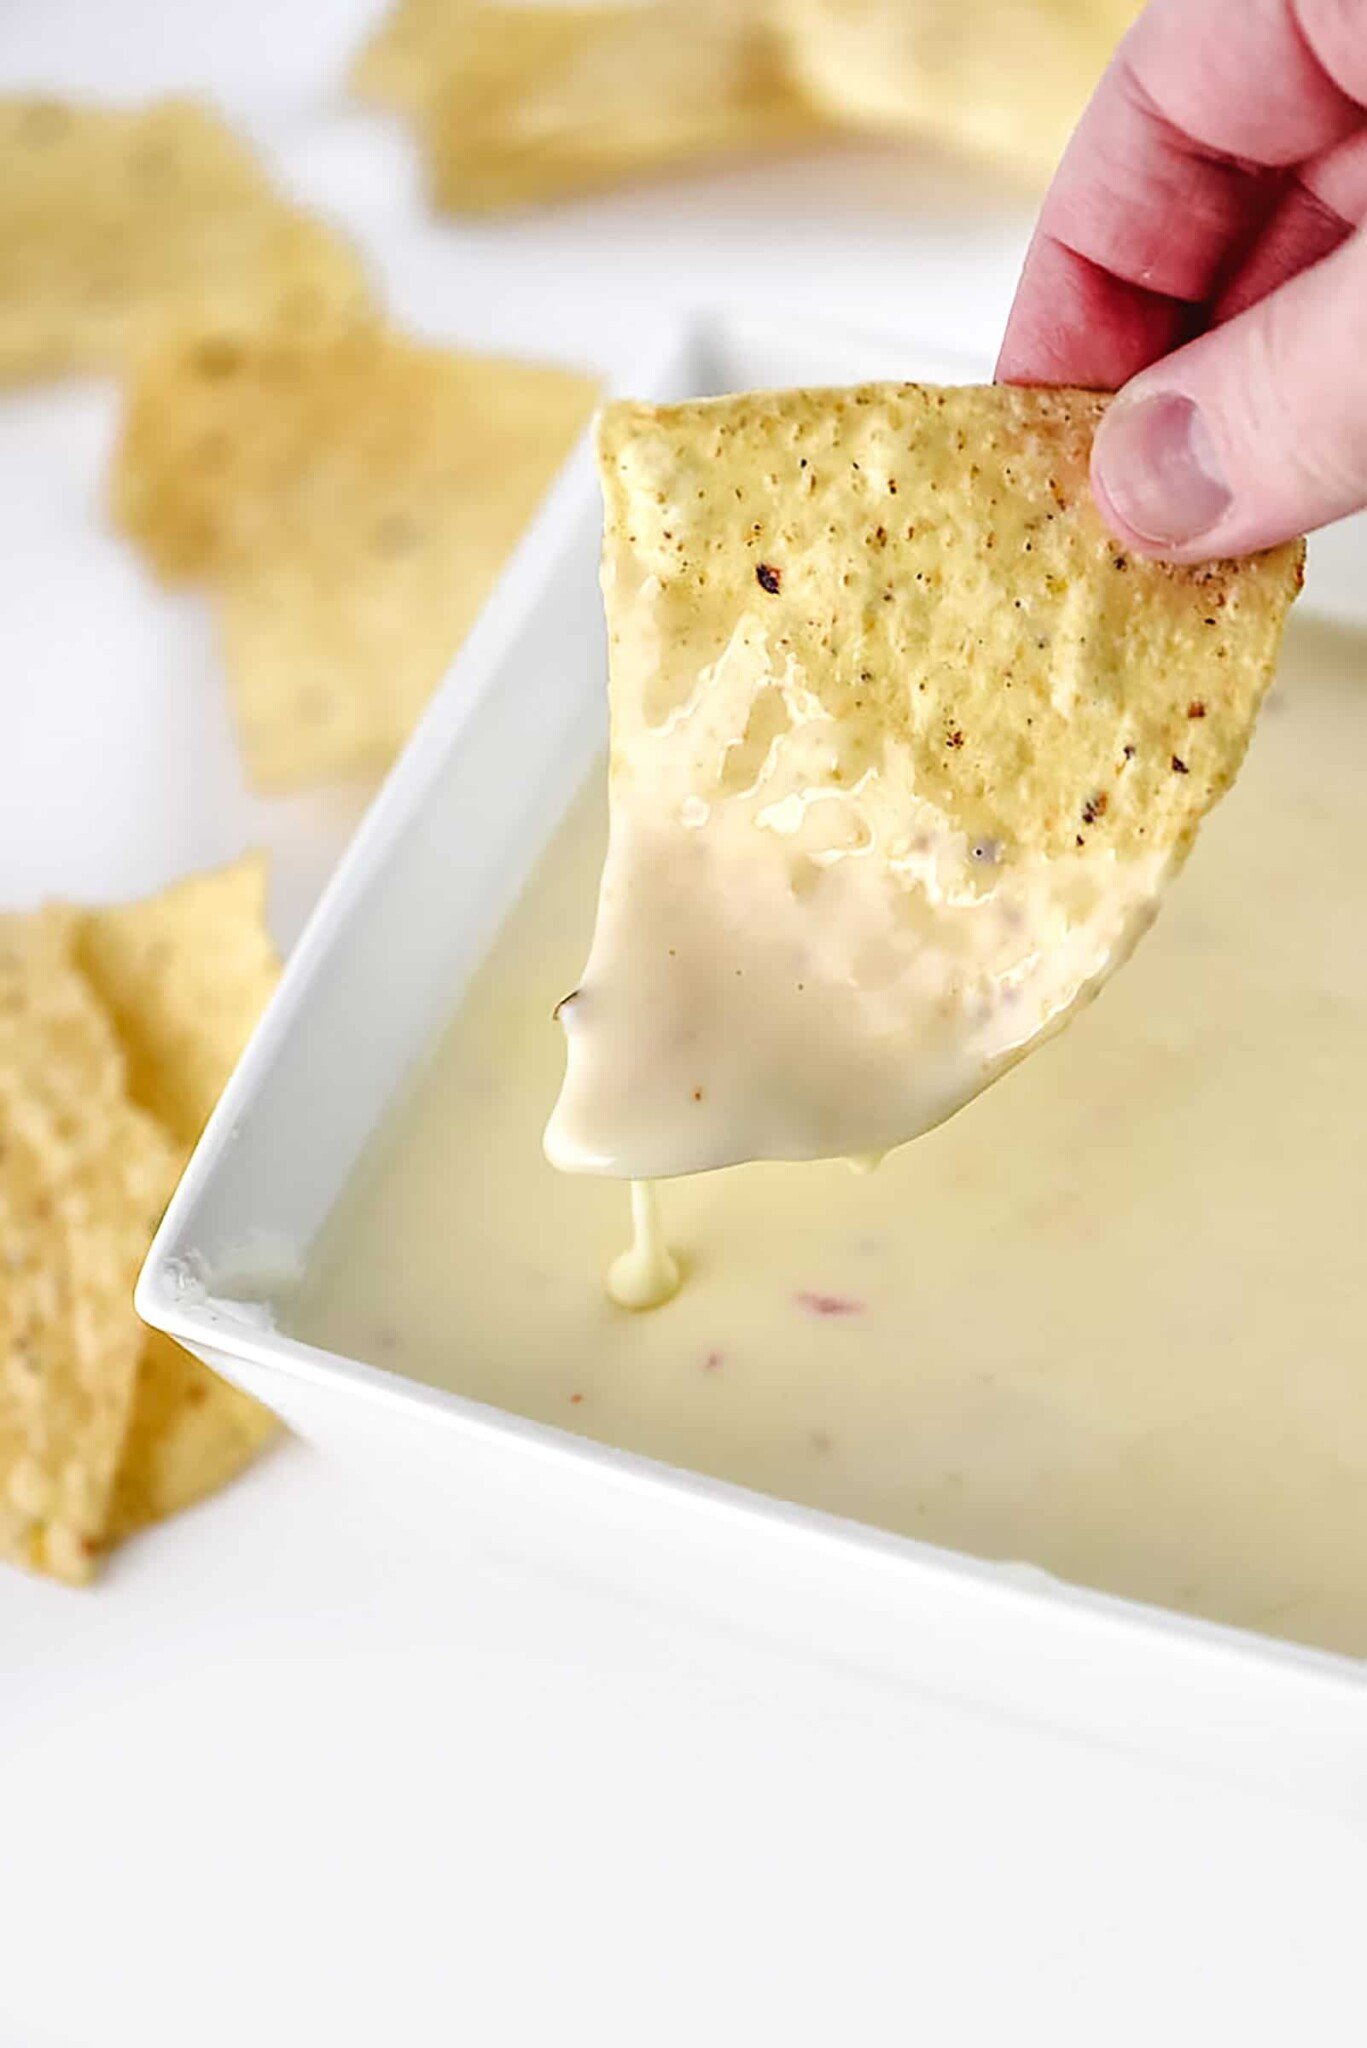 Yes, You Can Make Cheesy, Yummy Queso Entirely From Plants